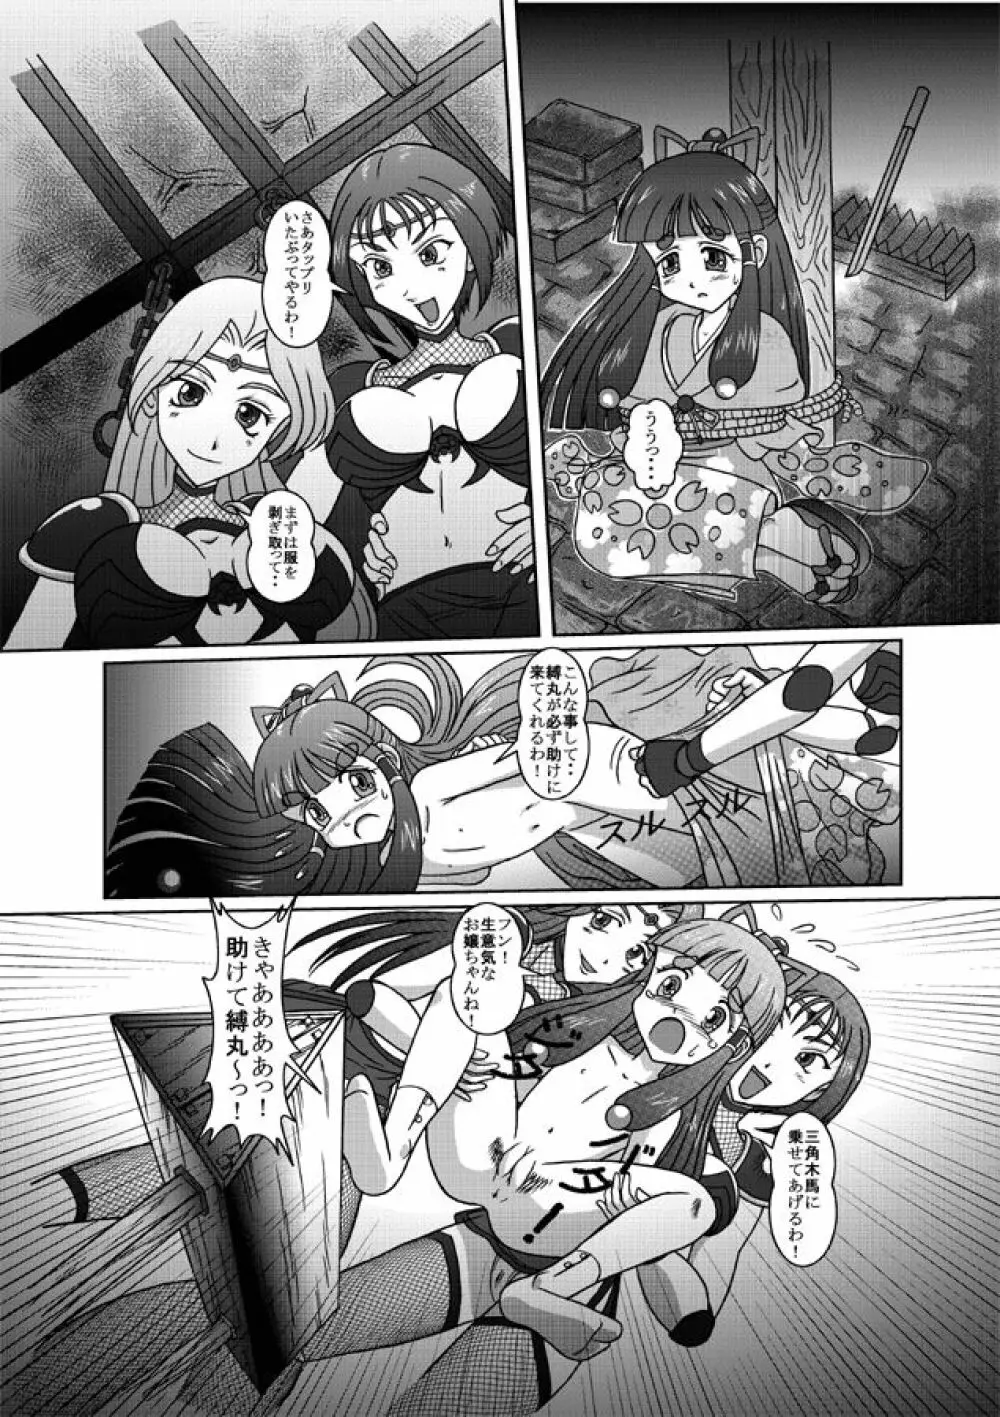 Same-themed manga about kid fighting female ninjas from japanese imageboard. Page.20